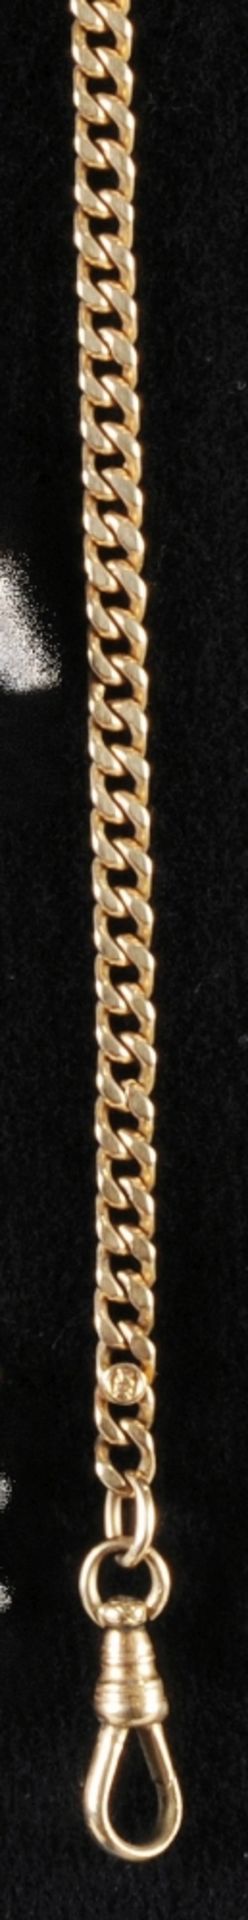 Gold pocket watch chain, 14 ct., armoured links with toggle